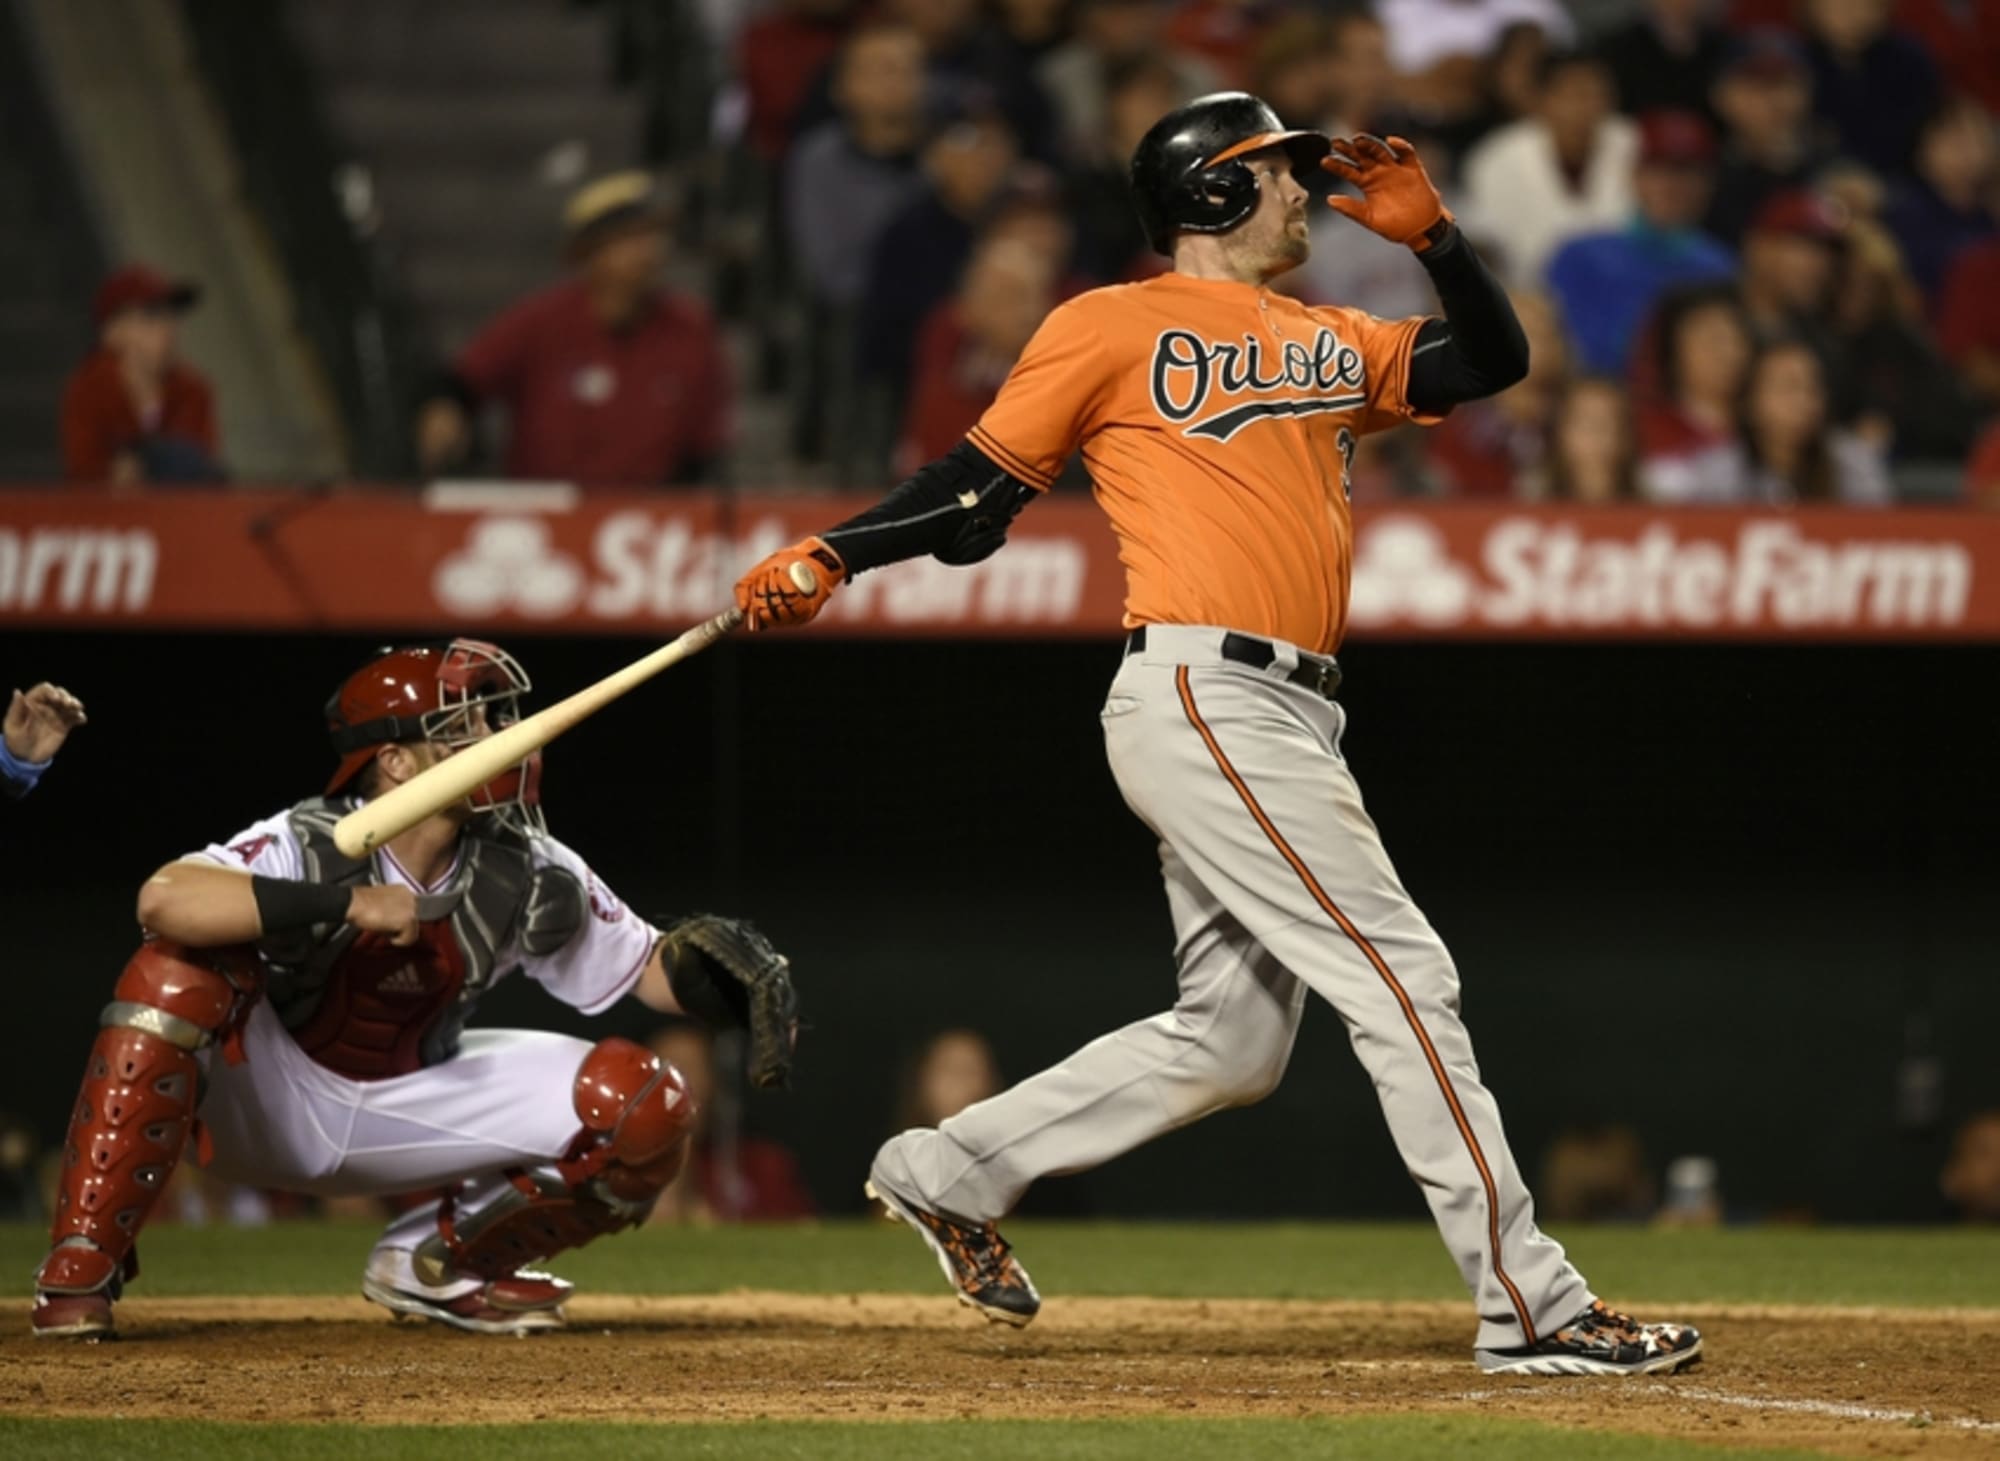 Matt Wieters' time as an Oriole was only a disappointment compared